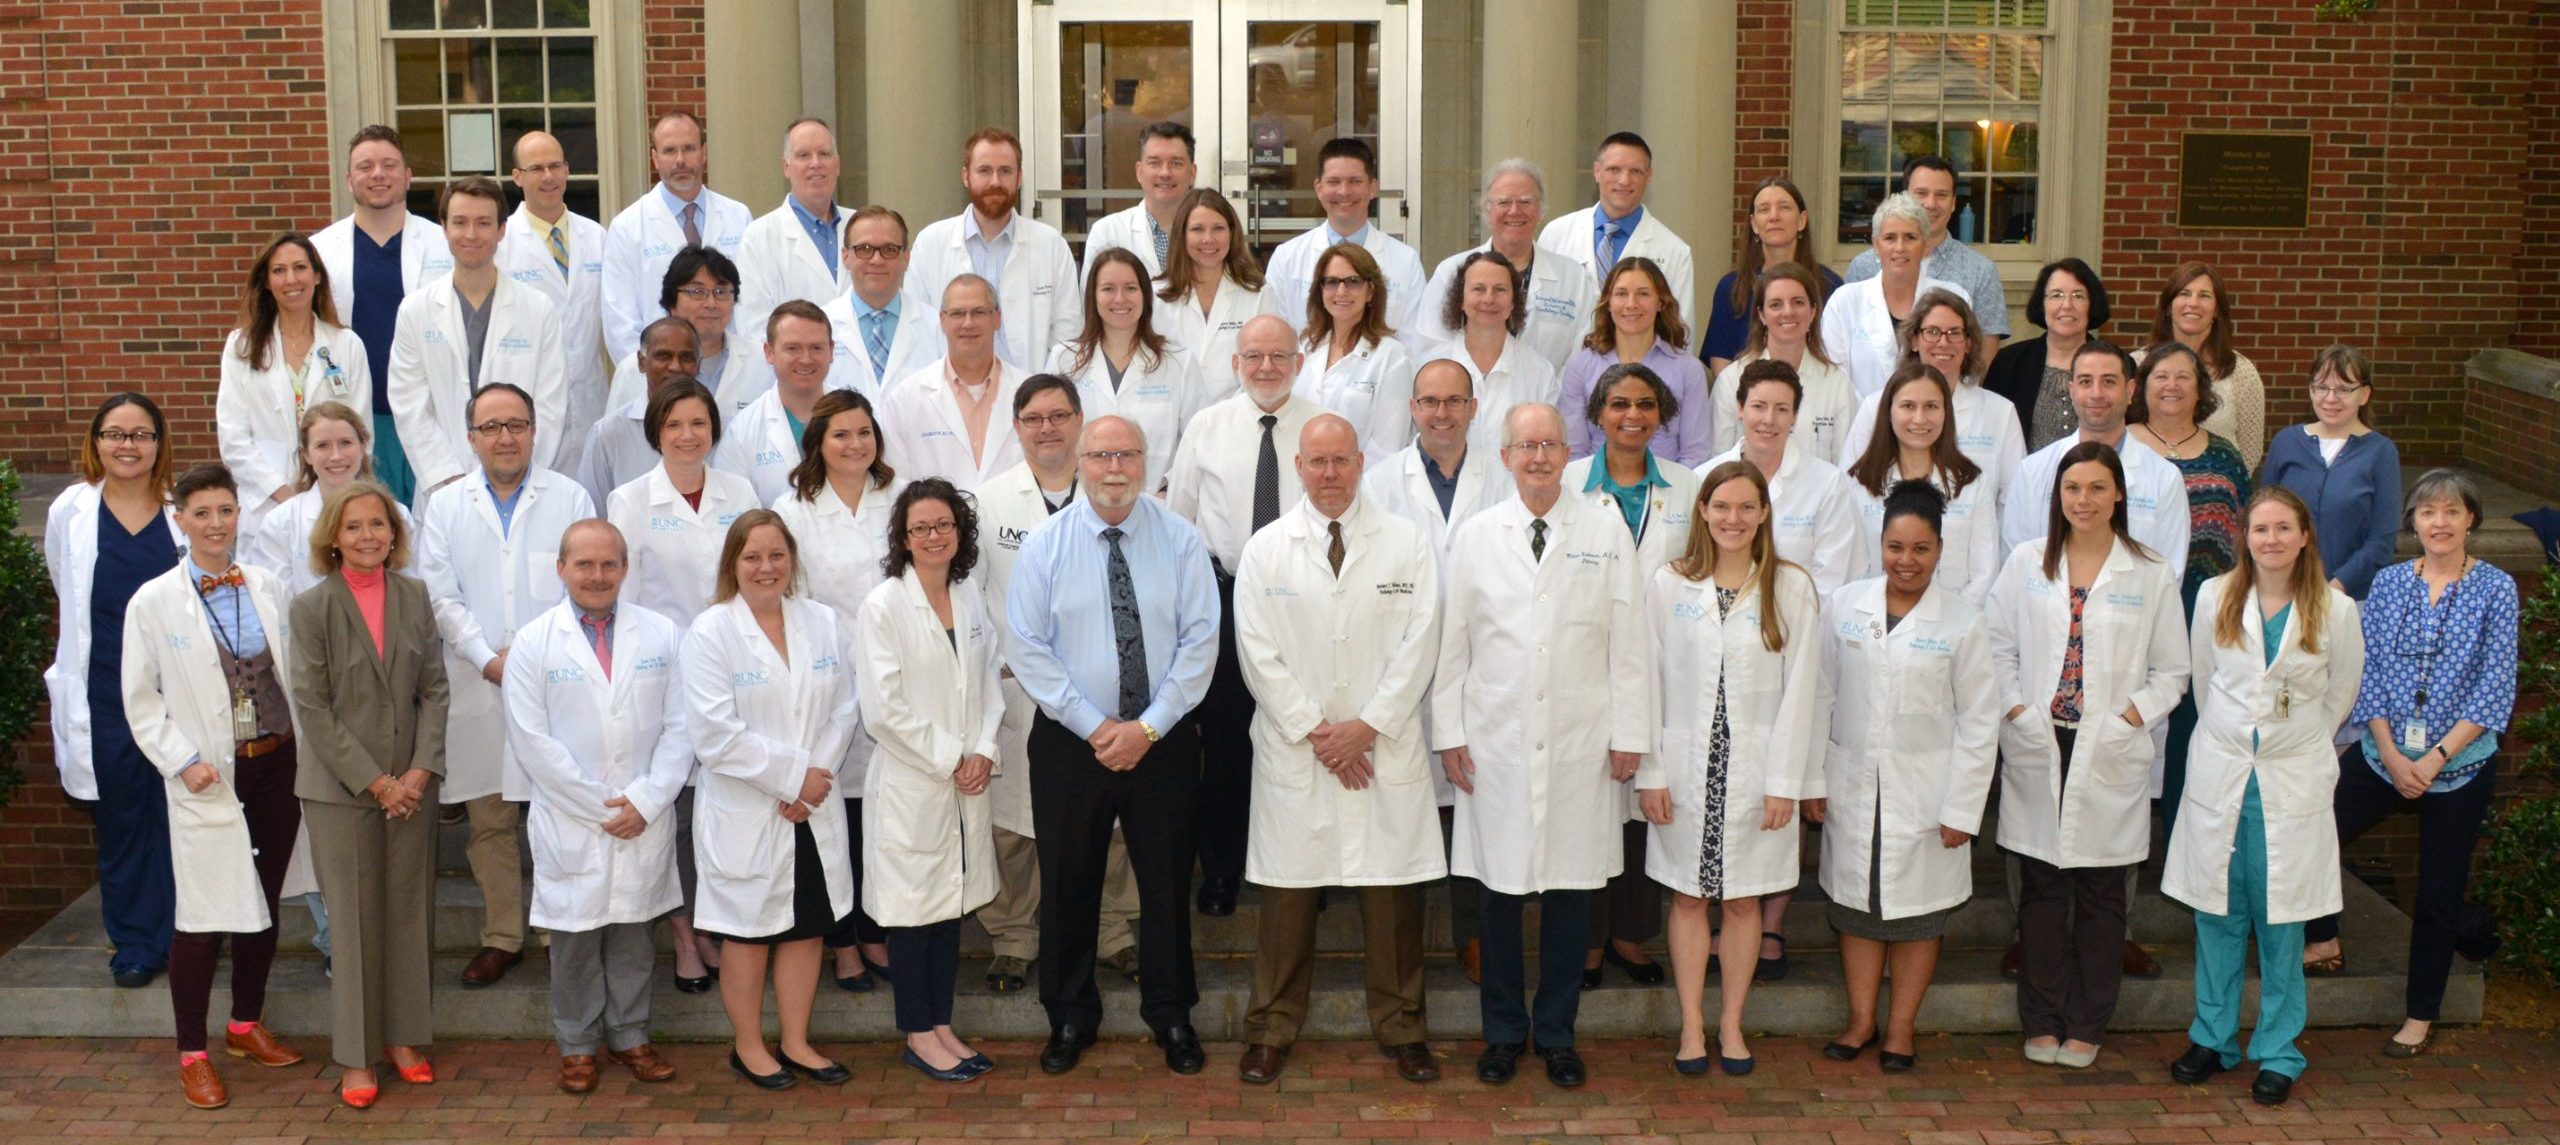 Faculty and Trainees group photo for 2017-2018 school year